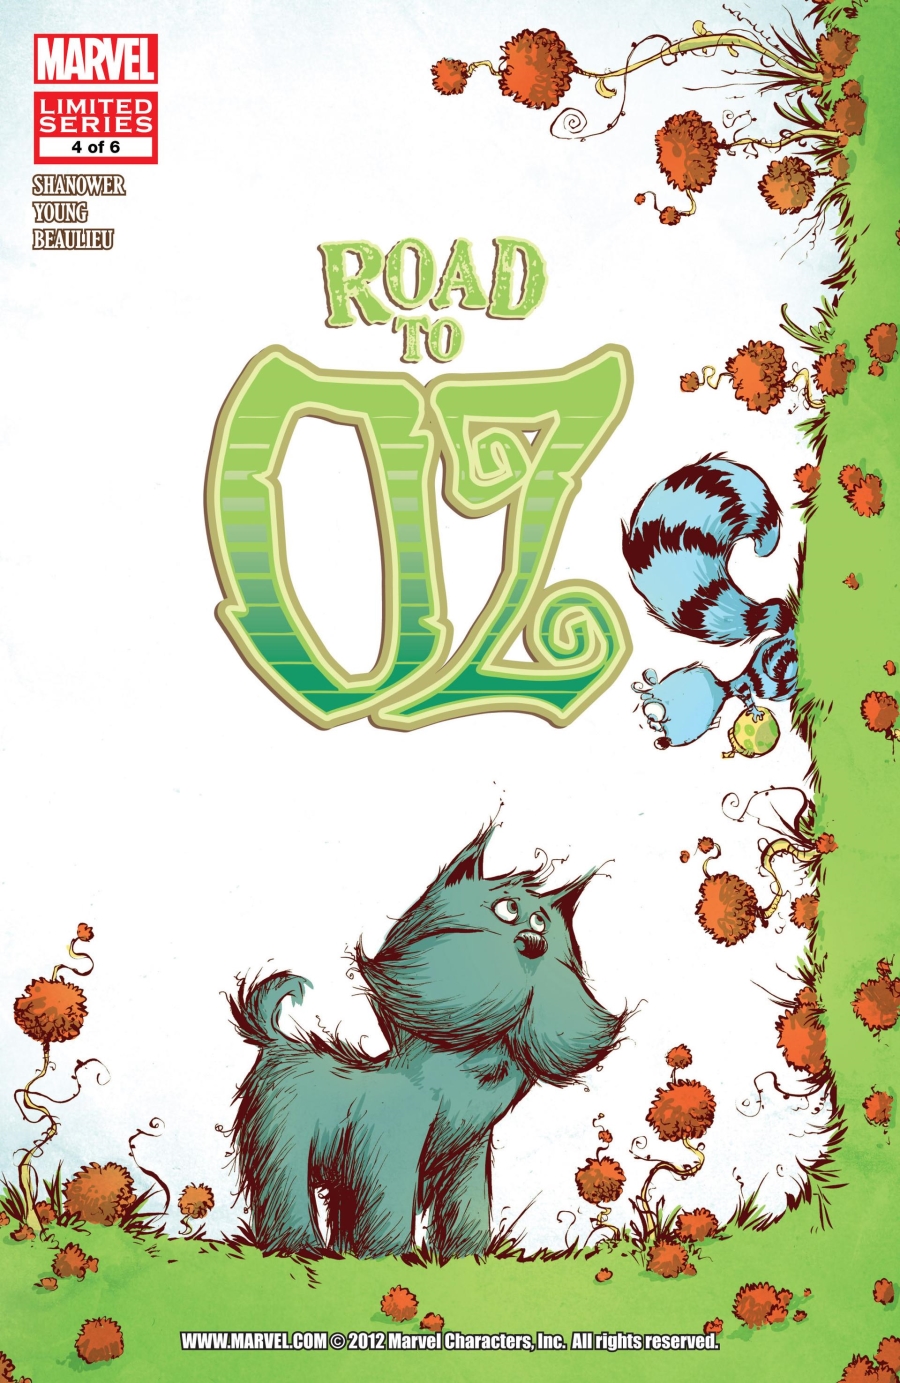 Road To Oz #11